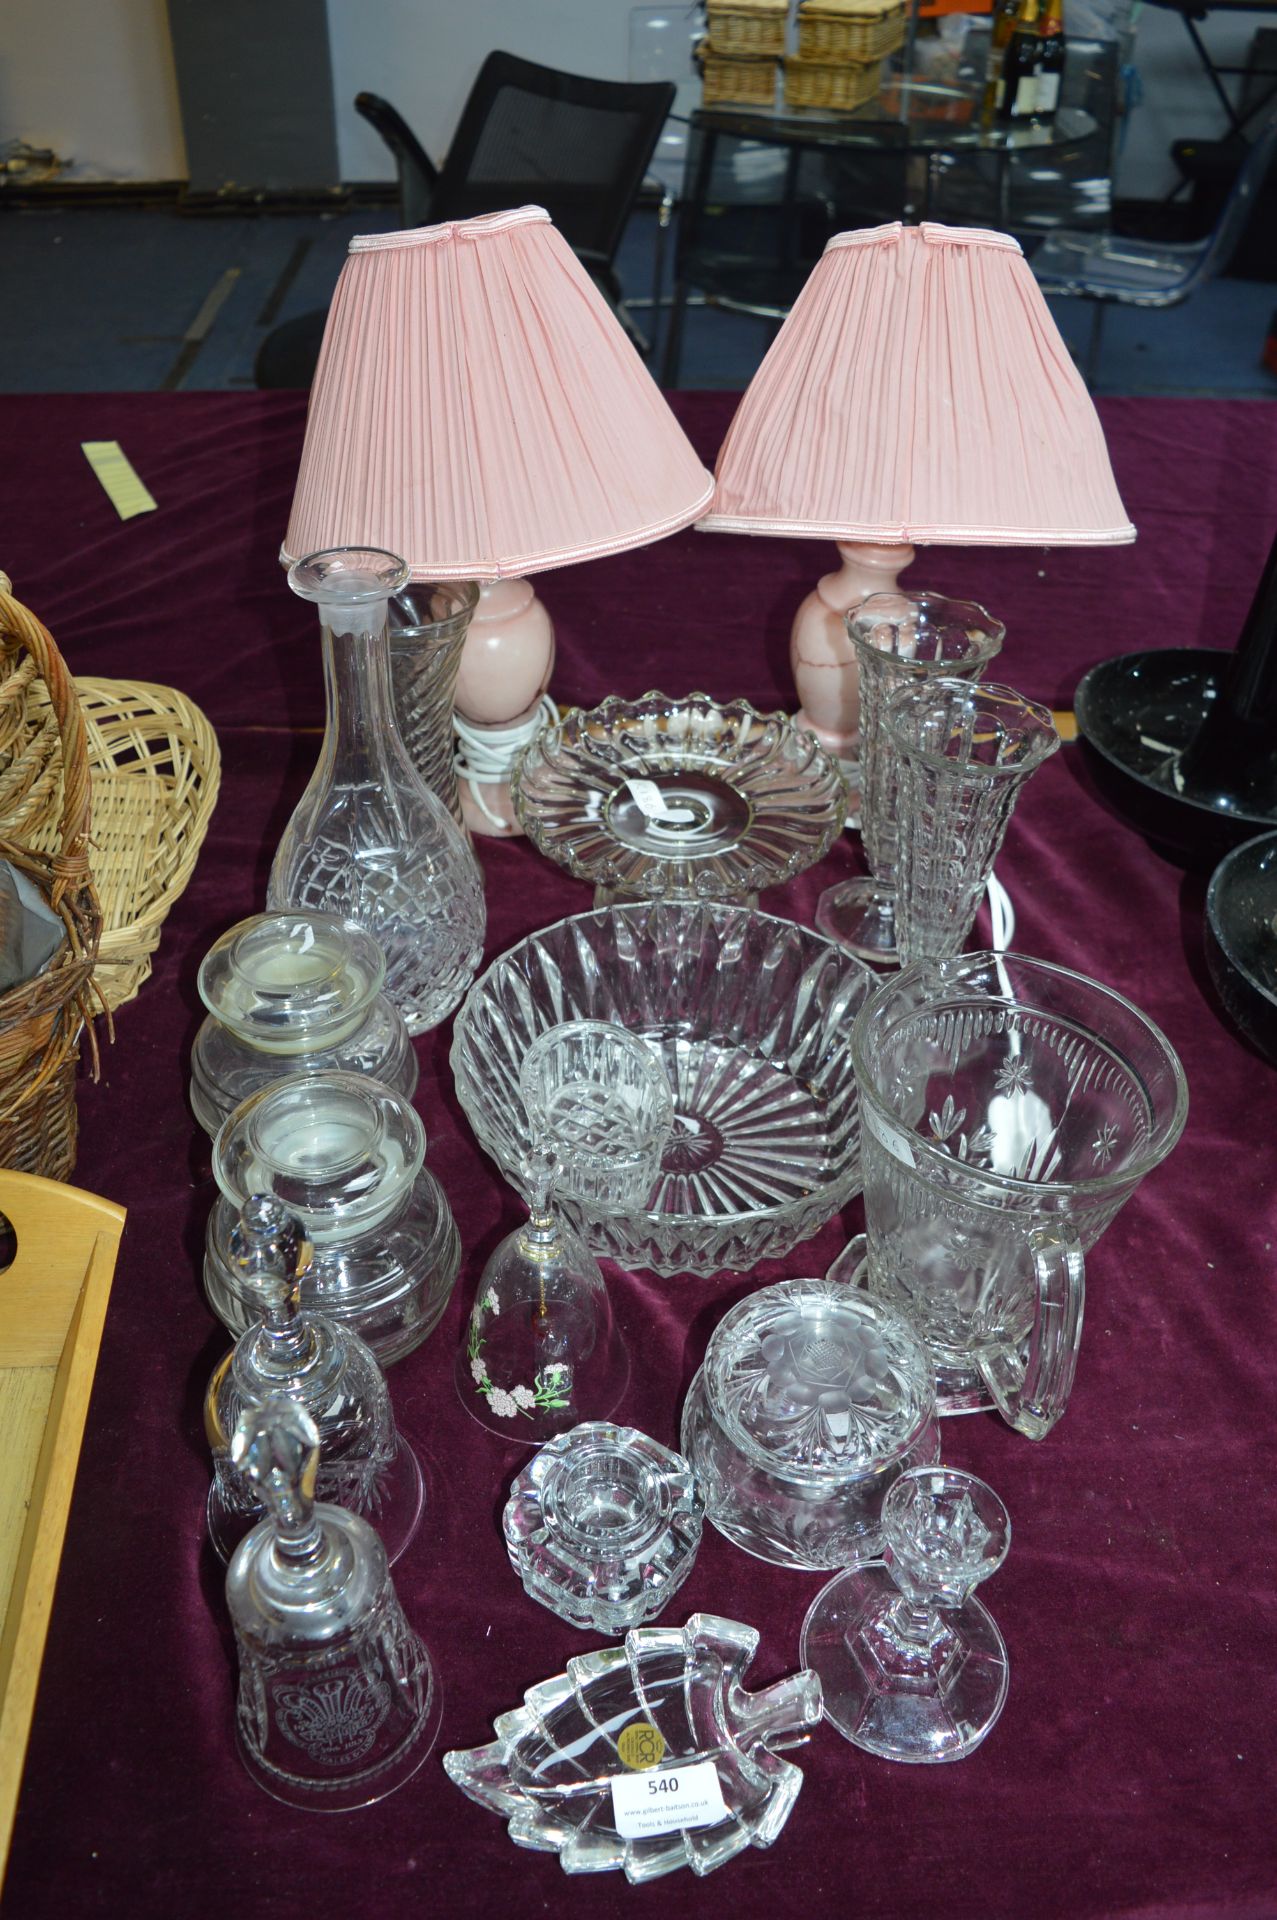 Glassware; Bowls, Jugs, Bells, and a Pair of Pink Table Lamps